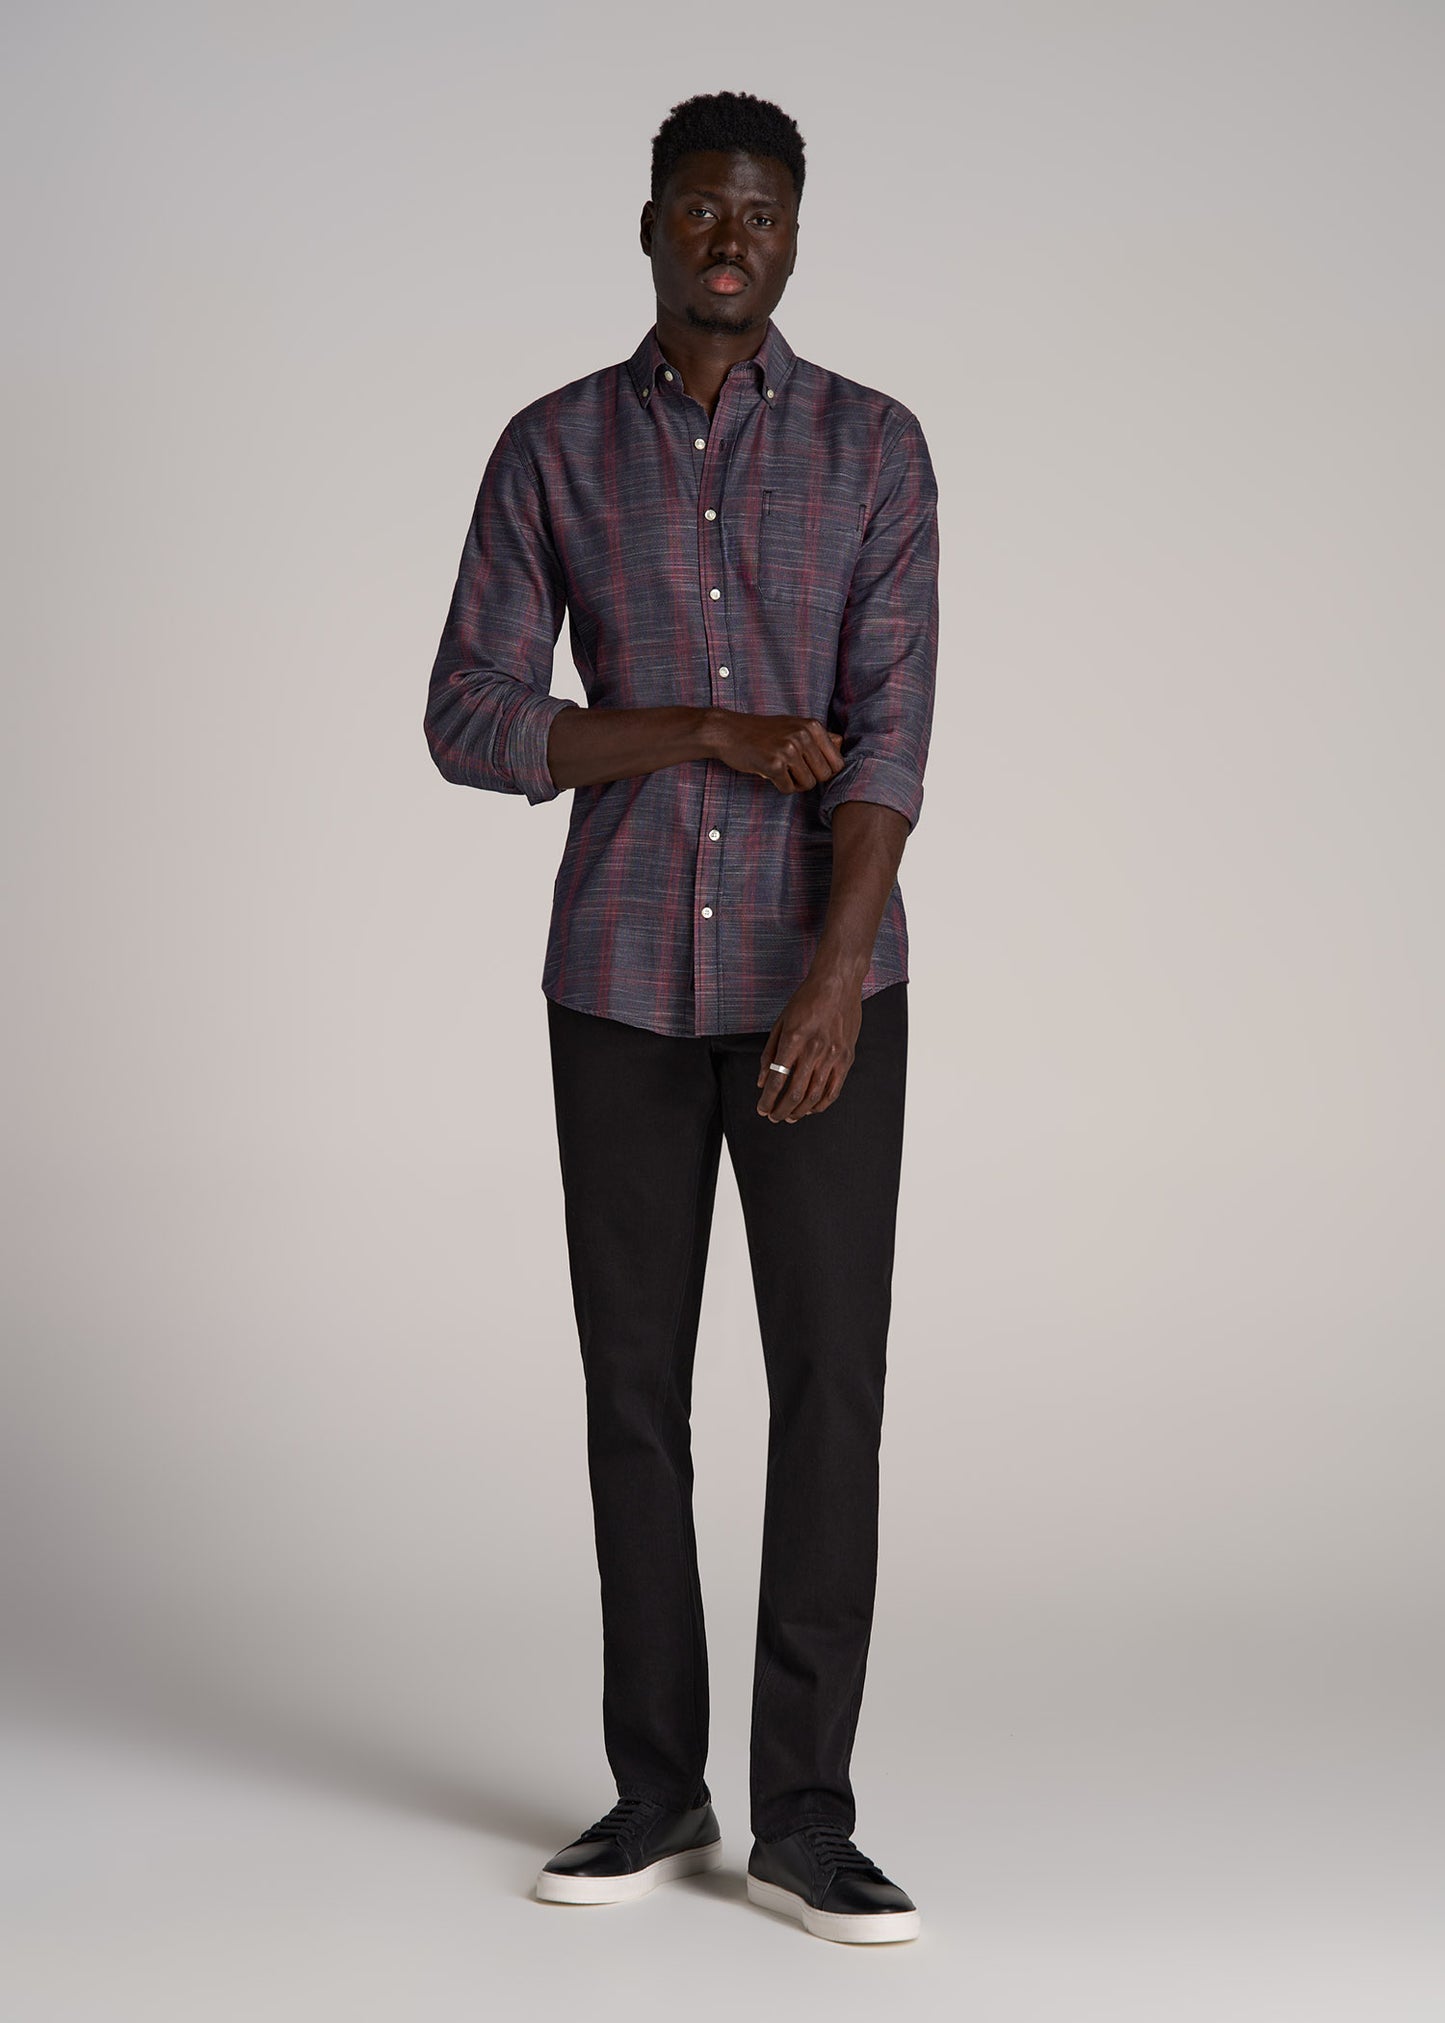 Textured Weave Cotton Button-Up Shirt for Tall Men in Red Plaid